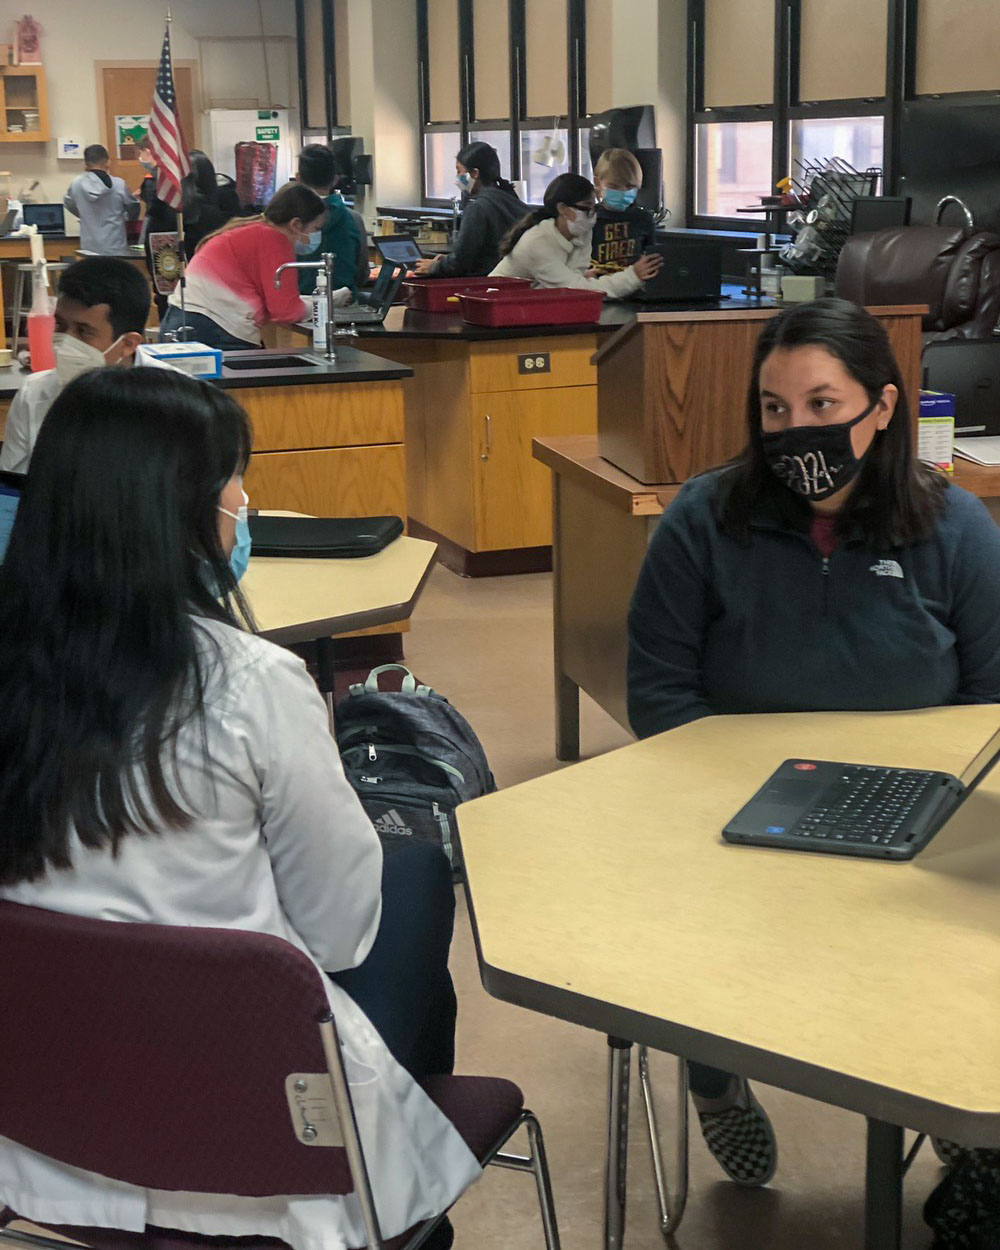 rural health mentor and student in discussion wearing masks